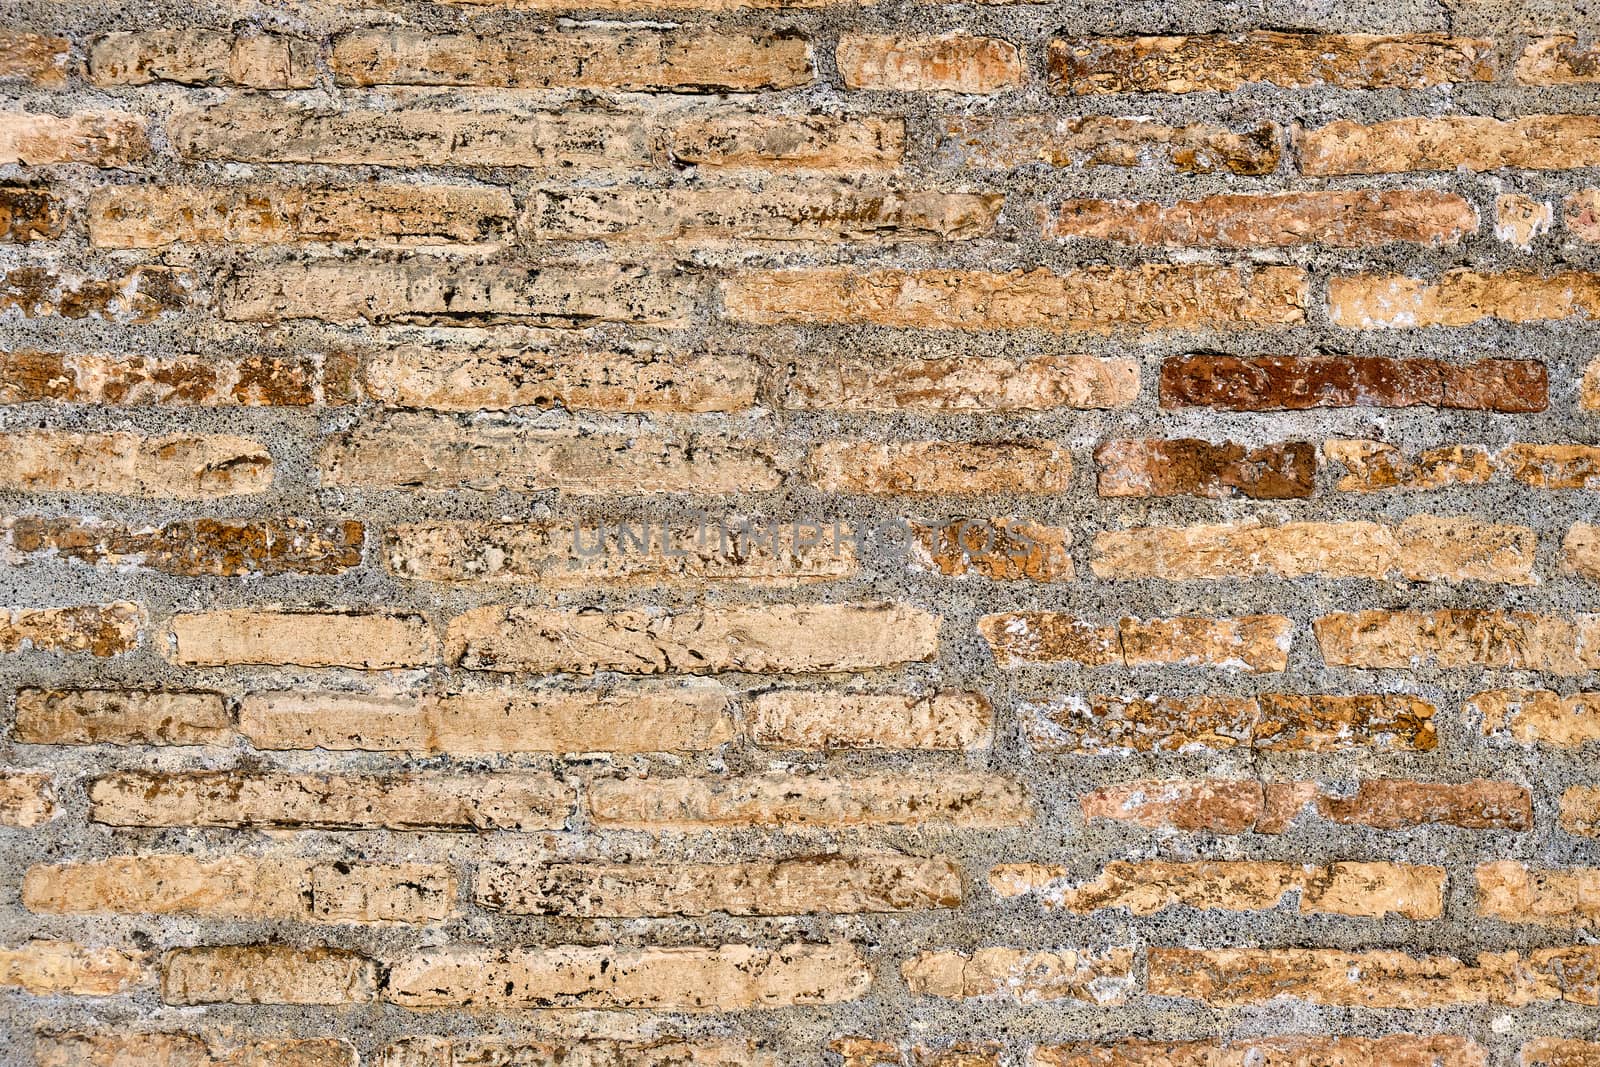 Background from a rough historic brick wall